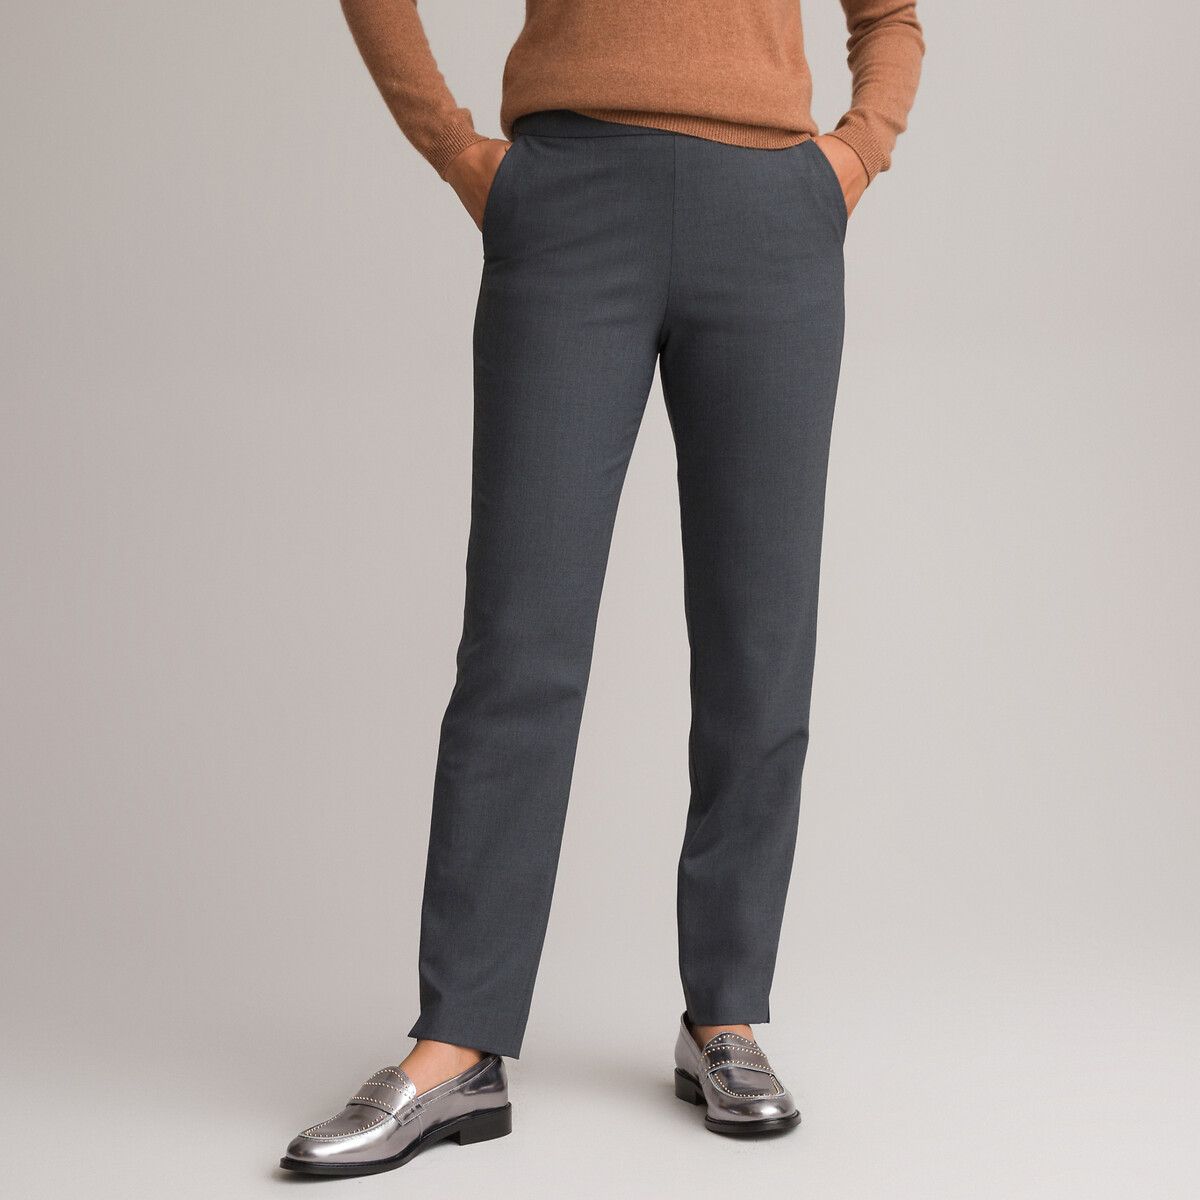 Image of Wool Mix Peg Trousers, Length 29.5"